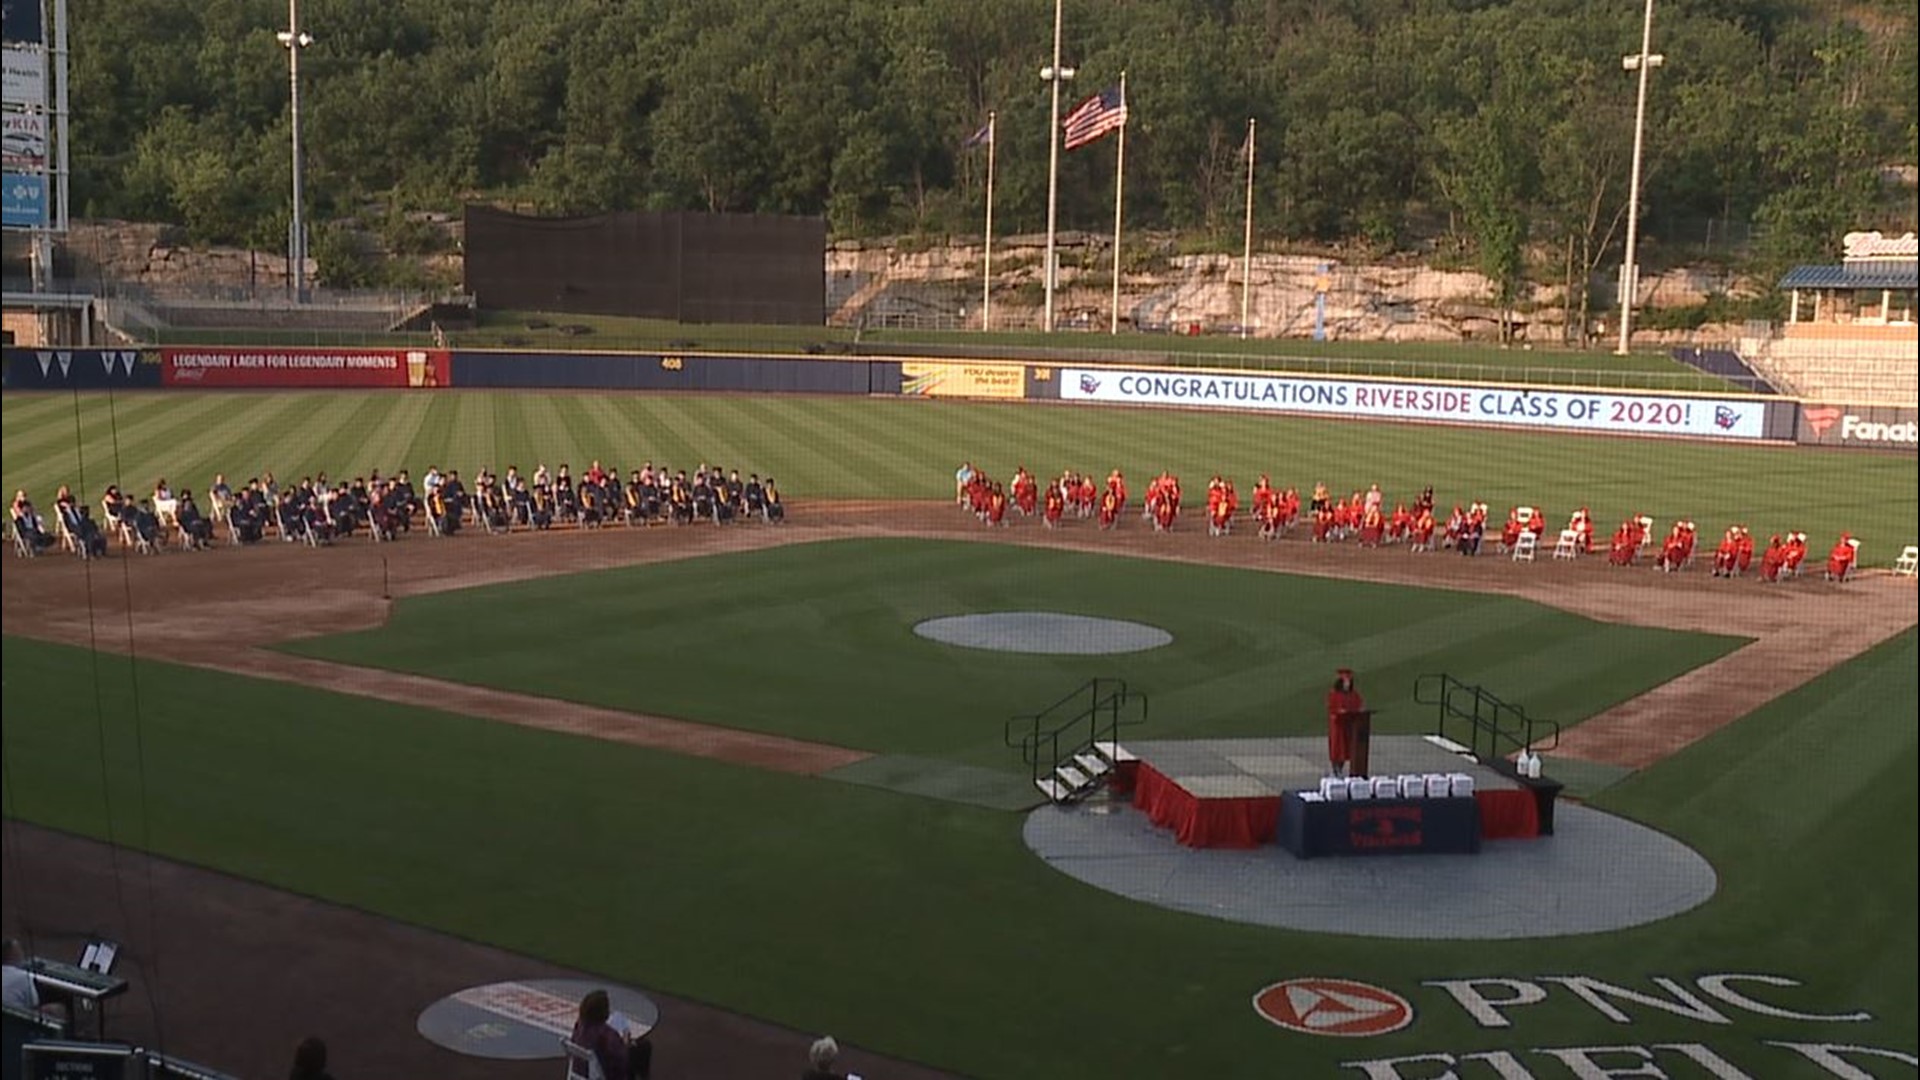 Friends and family came together to celebrate the class of 2020 at PNC Field.